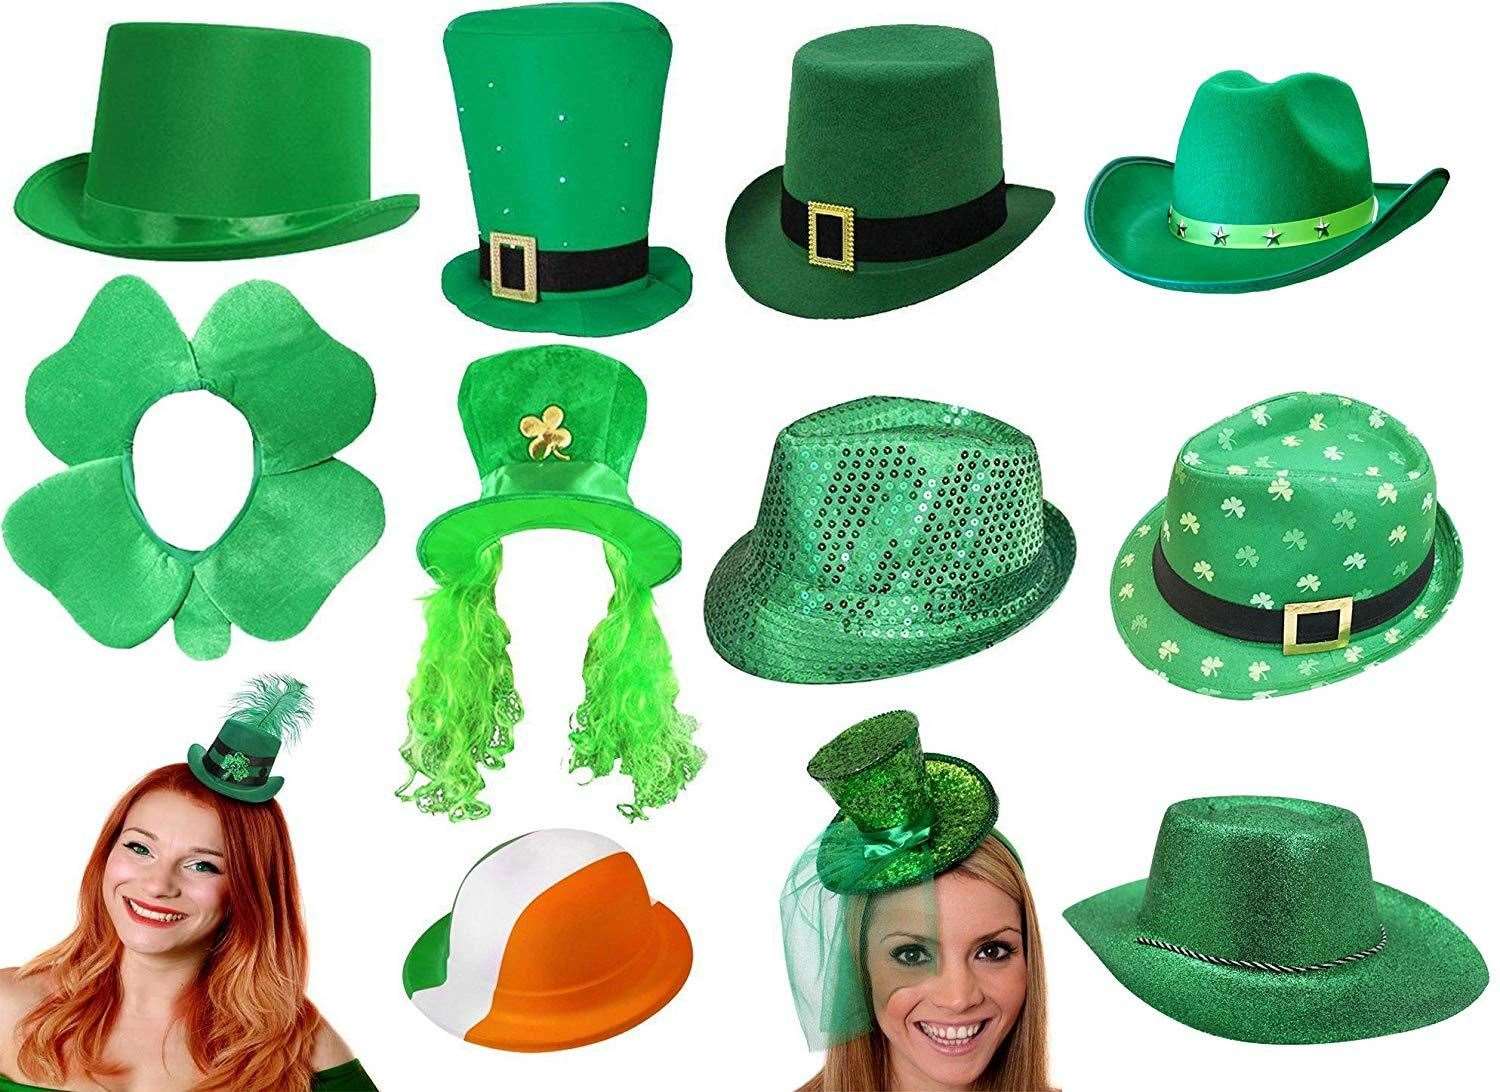 St Patrick's Day party hats in nine different styles!